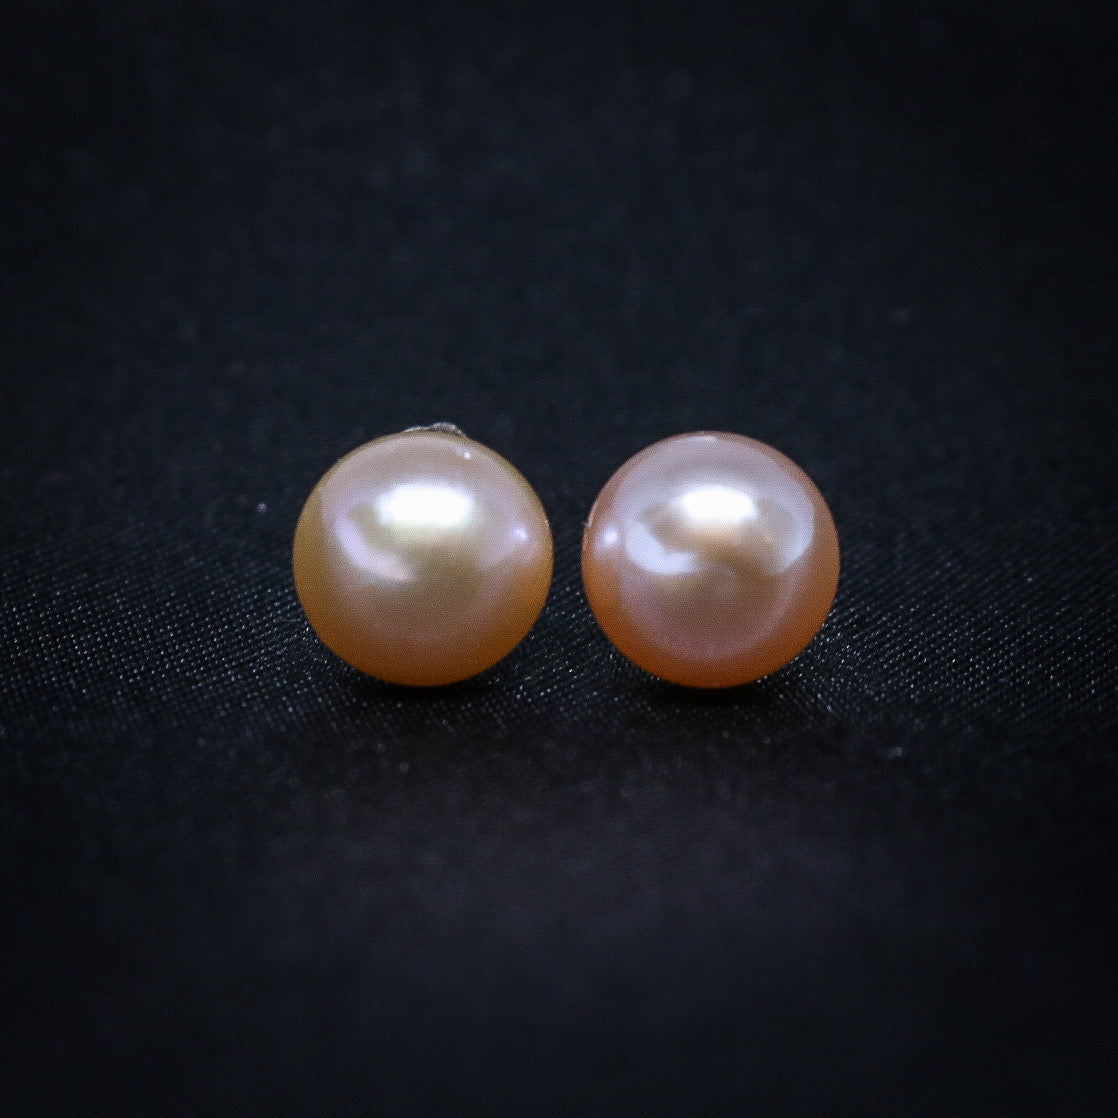 8mm Peach Pink Round Freshwater Pearl Earrings - Real 925 Silver